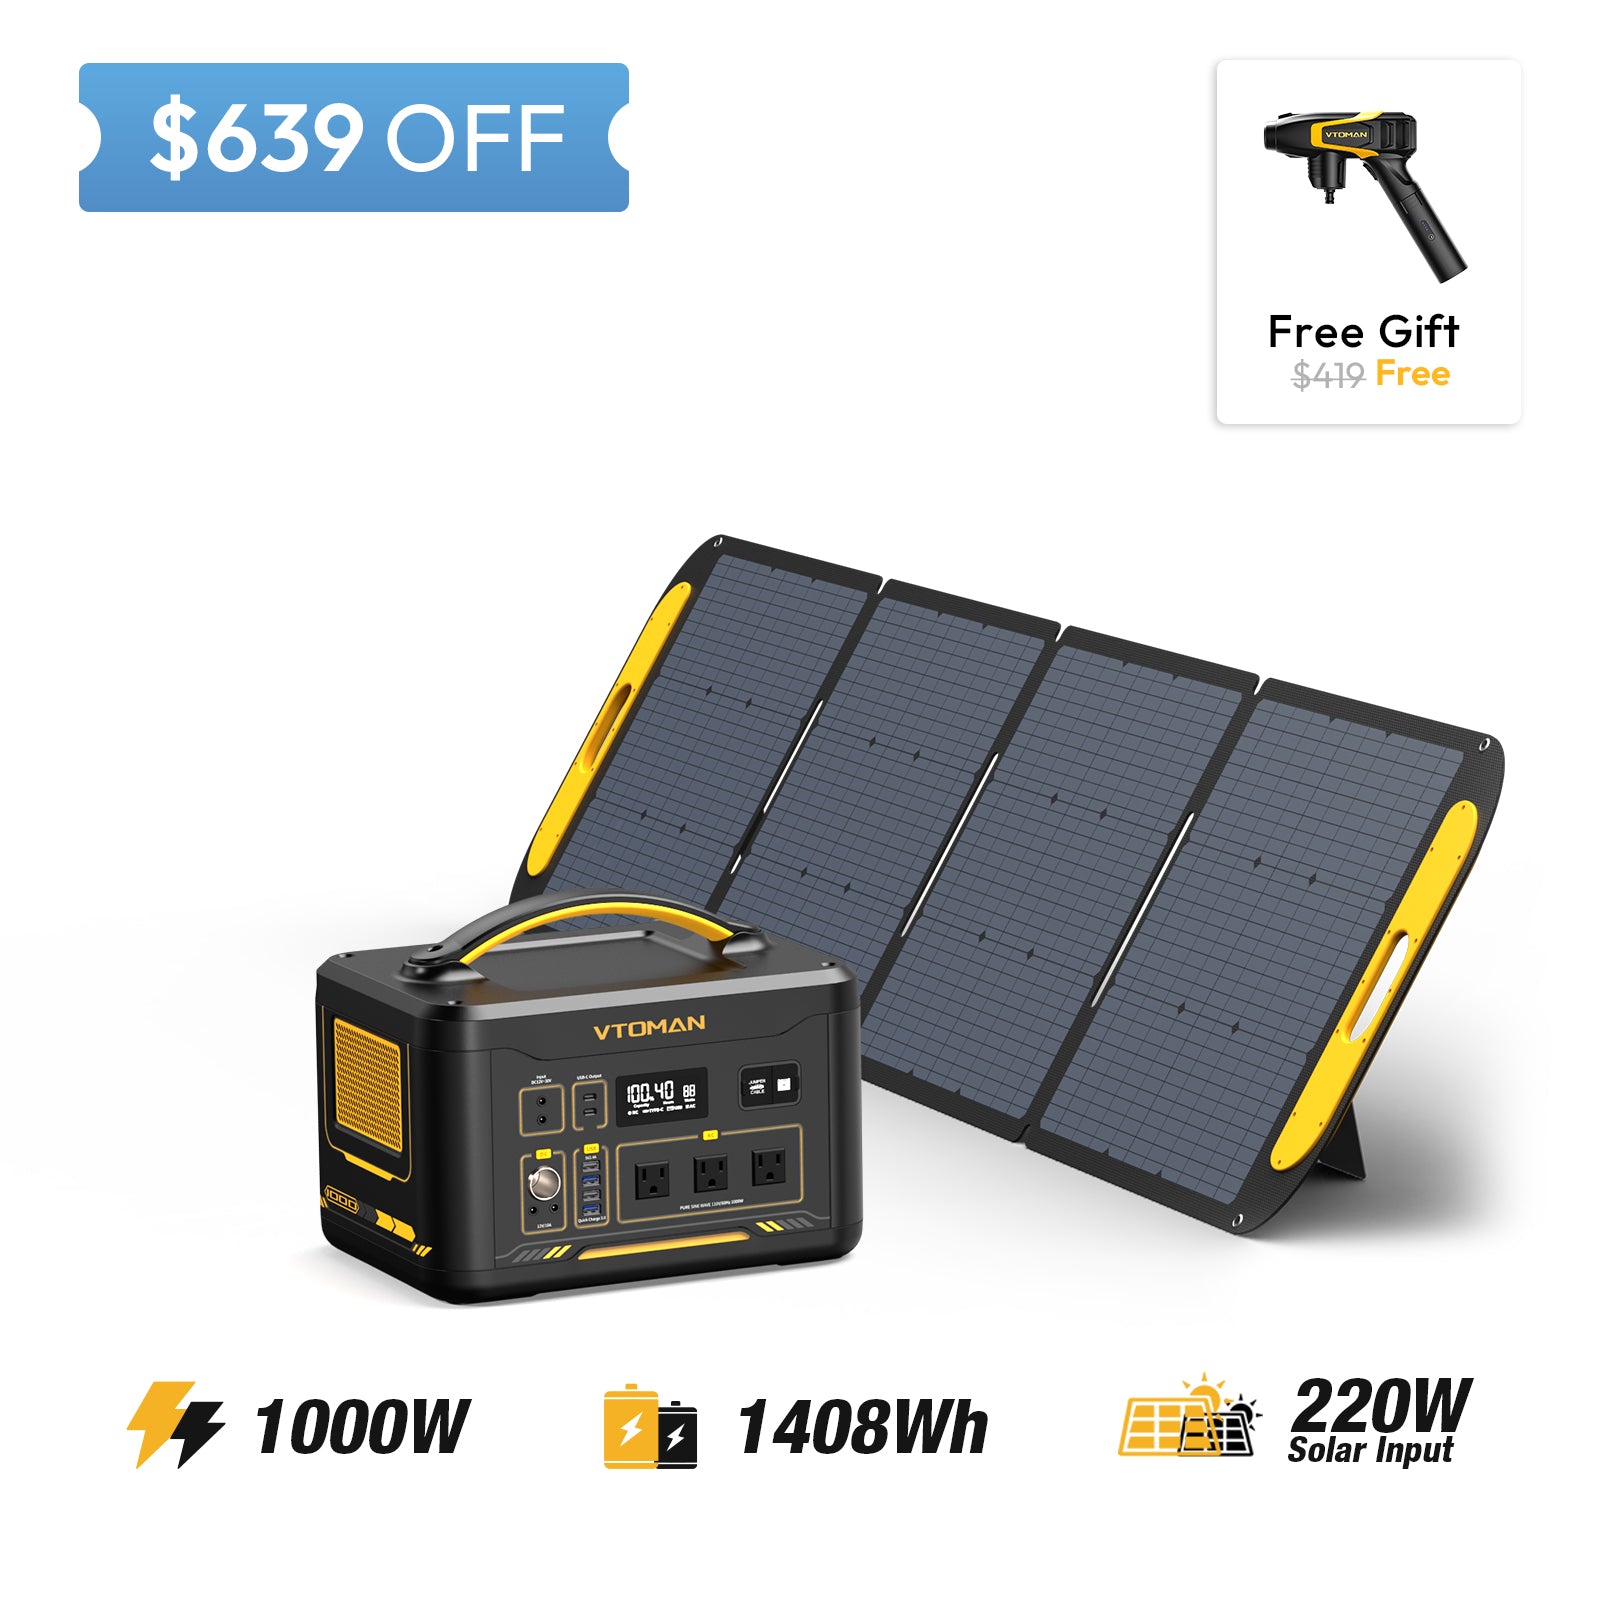 Jump 1000 and 220w solar panel save $639 in summer sale